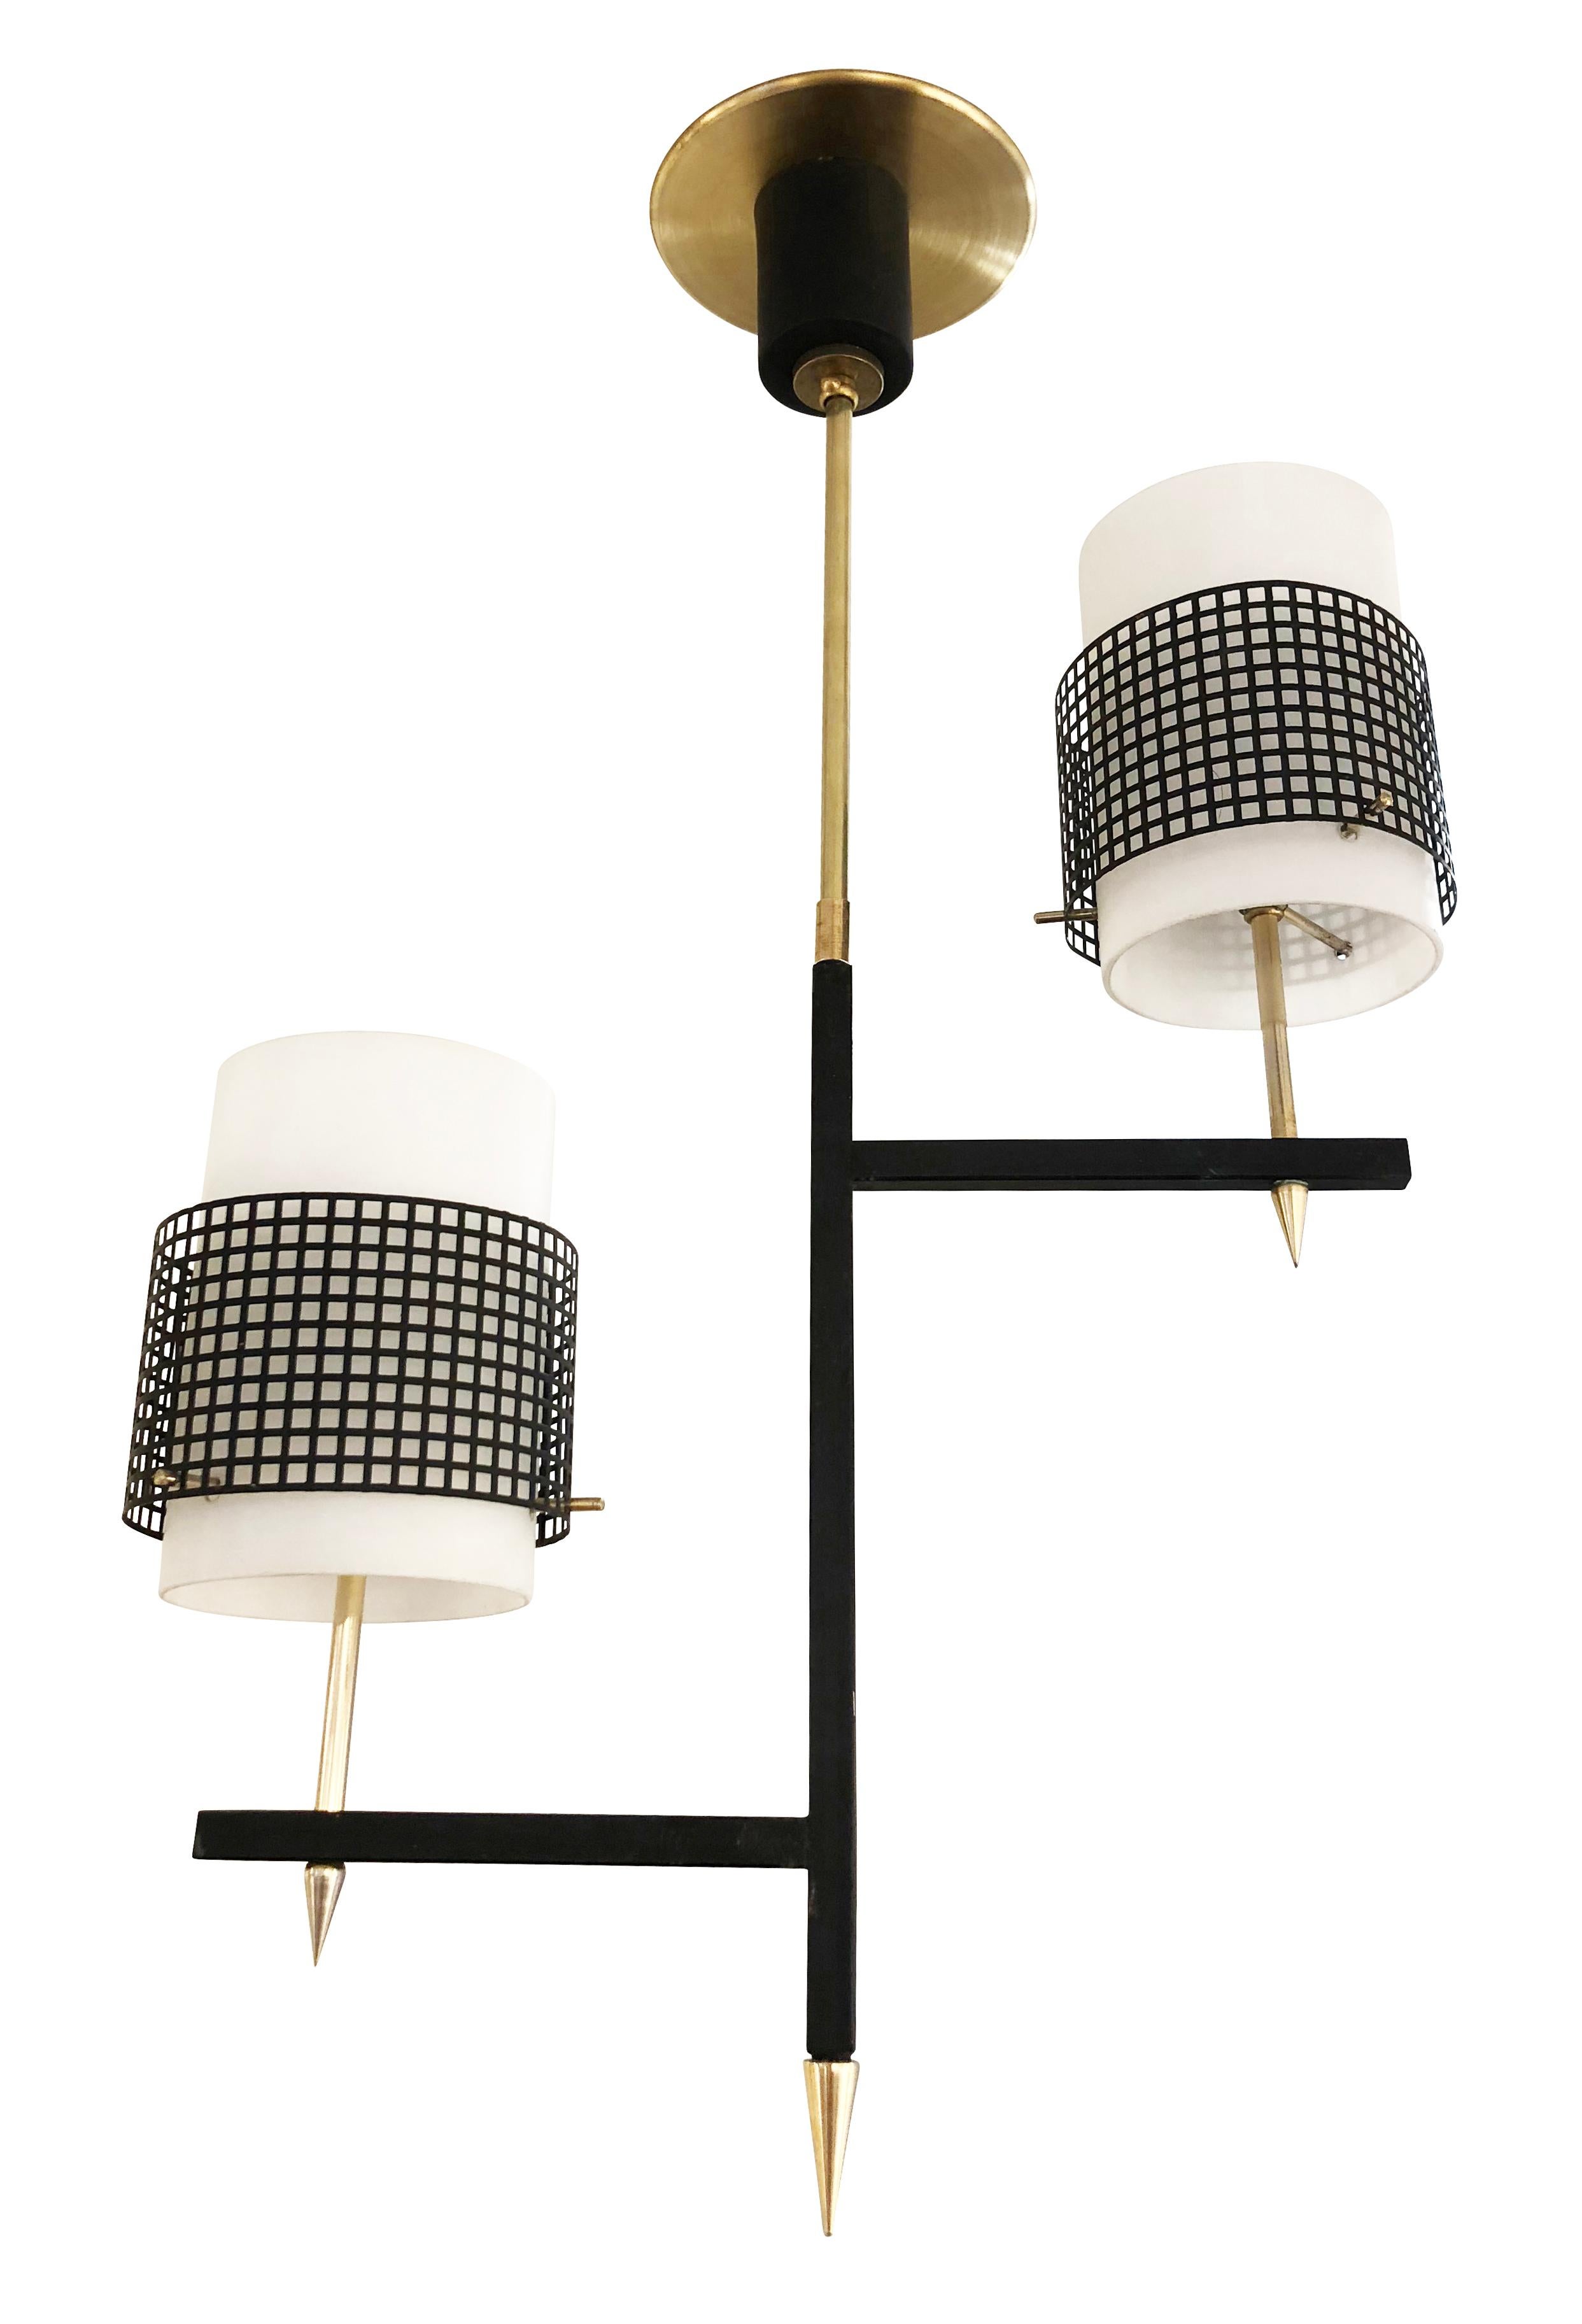 Italian midcentury pendant with two staggered frosted glass shades decorated with a black metal mesh. Brass details. Holds two candelabra sockets.

Condition: Excellent vintage condition, minor wear consistent with age and use

Measures: Width